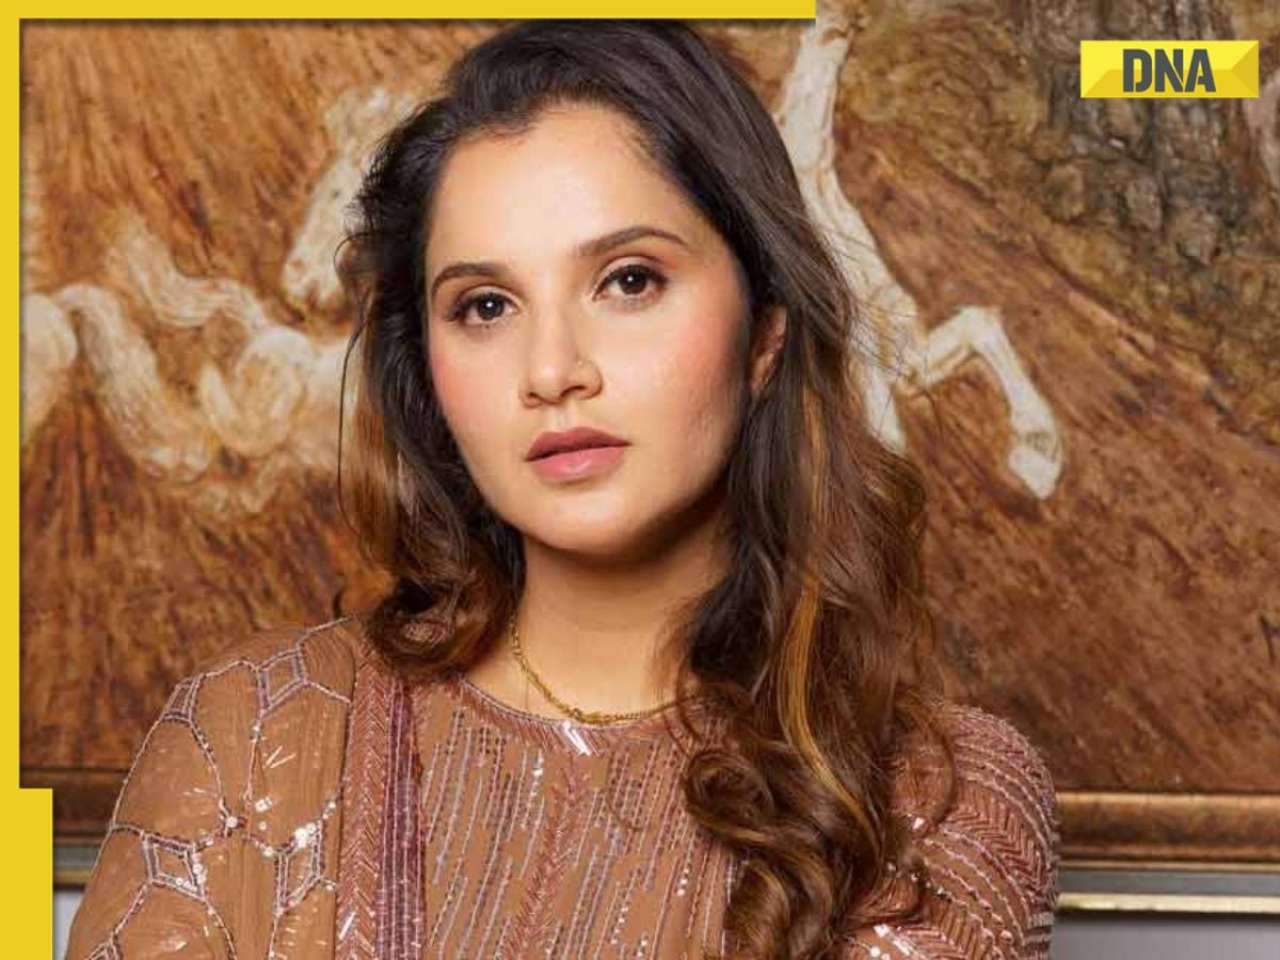 Sania Mirza's first photo in hijab goes viral, here's how much she earned from it